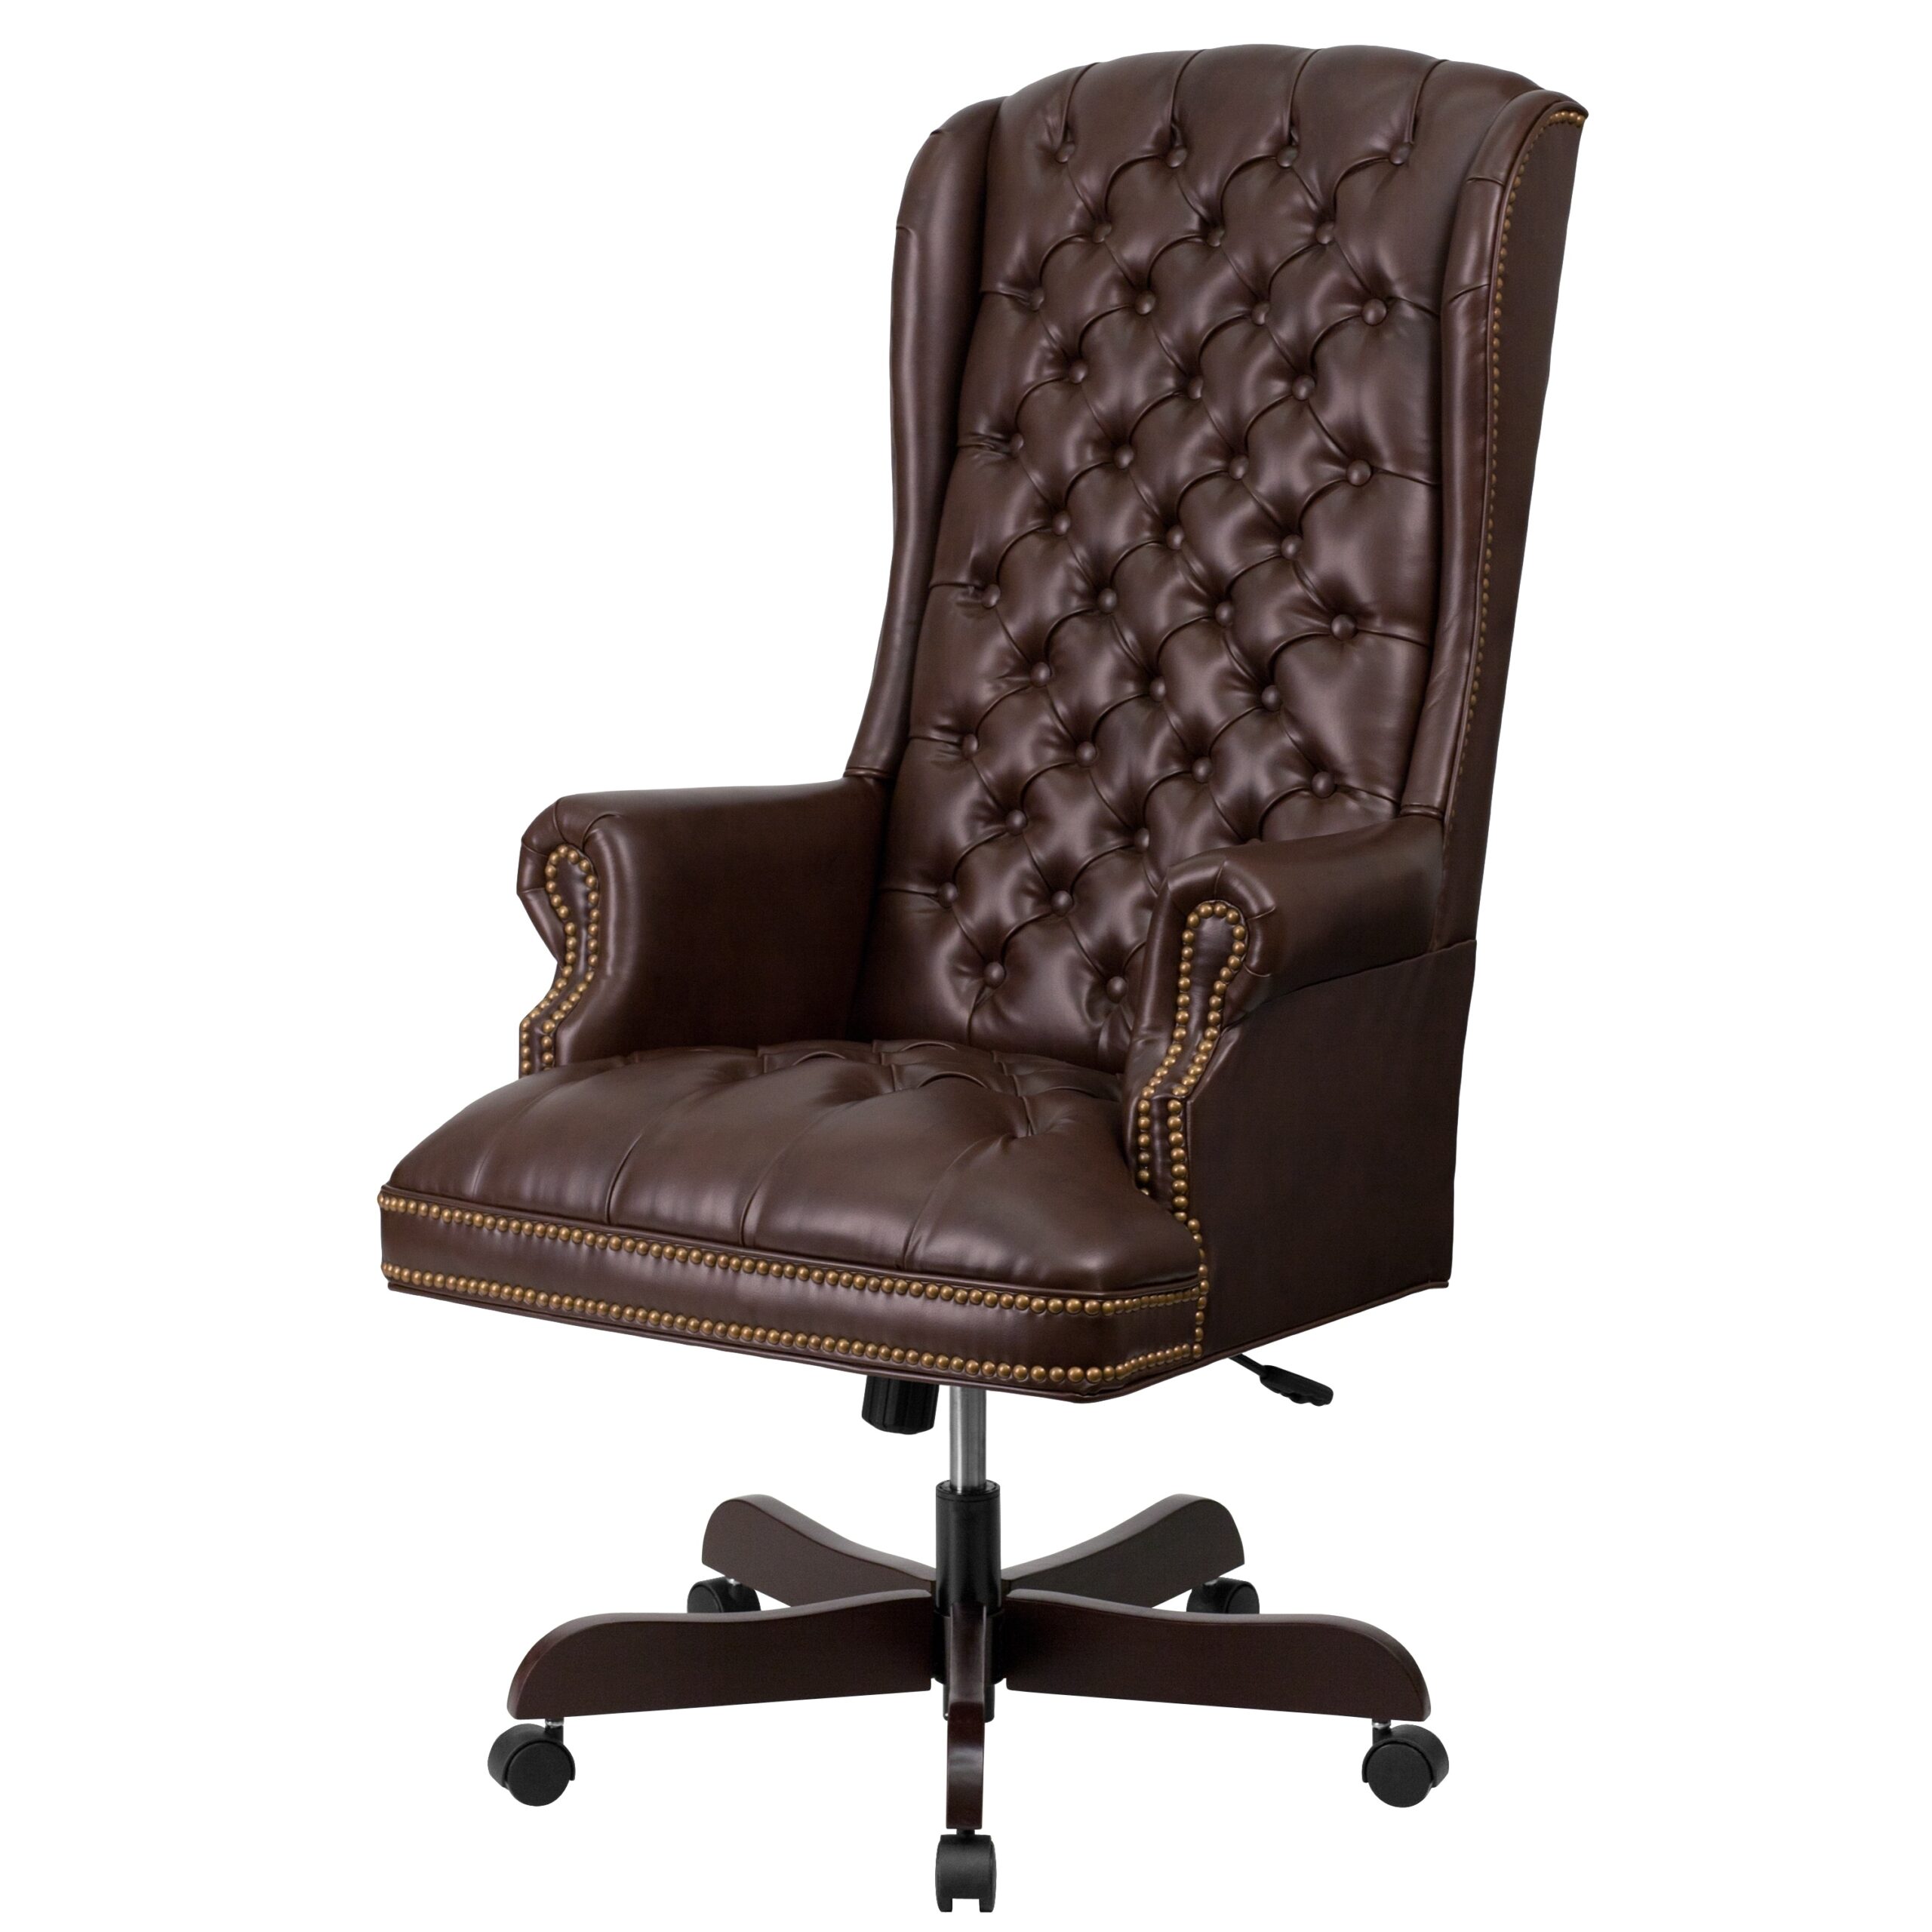 The Best Leather Executive Office Chairs Scaled 